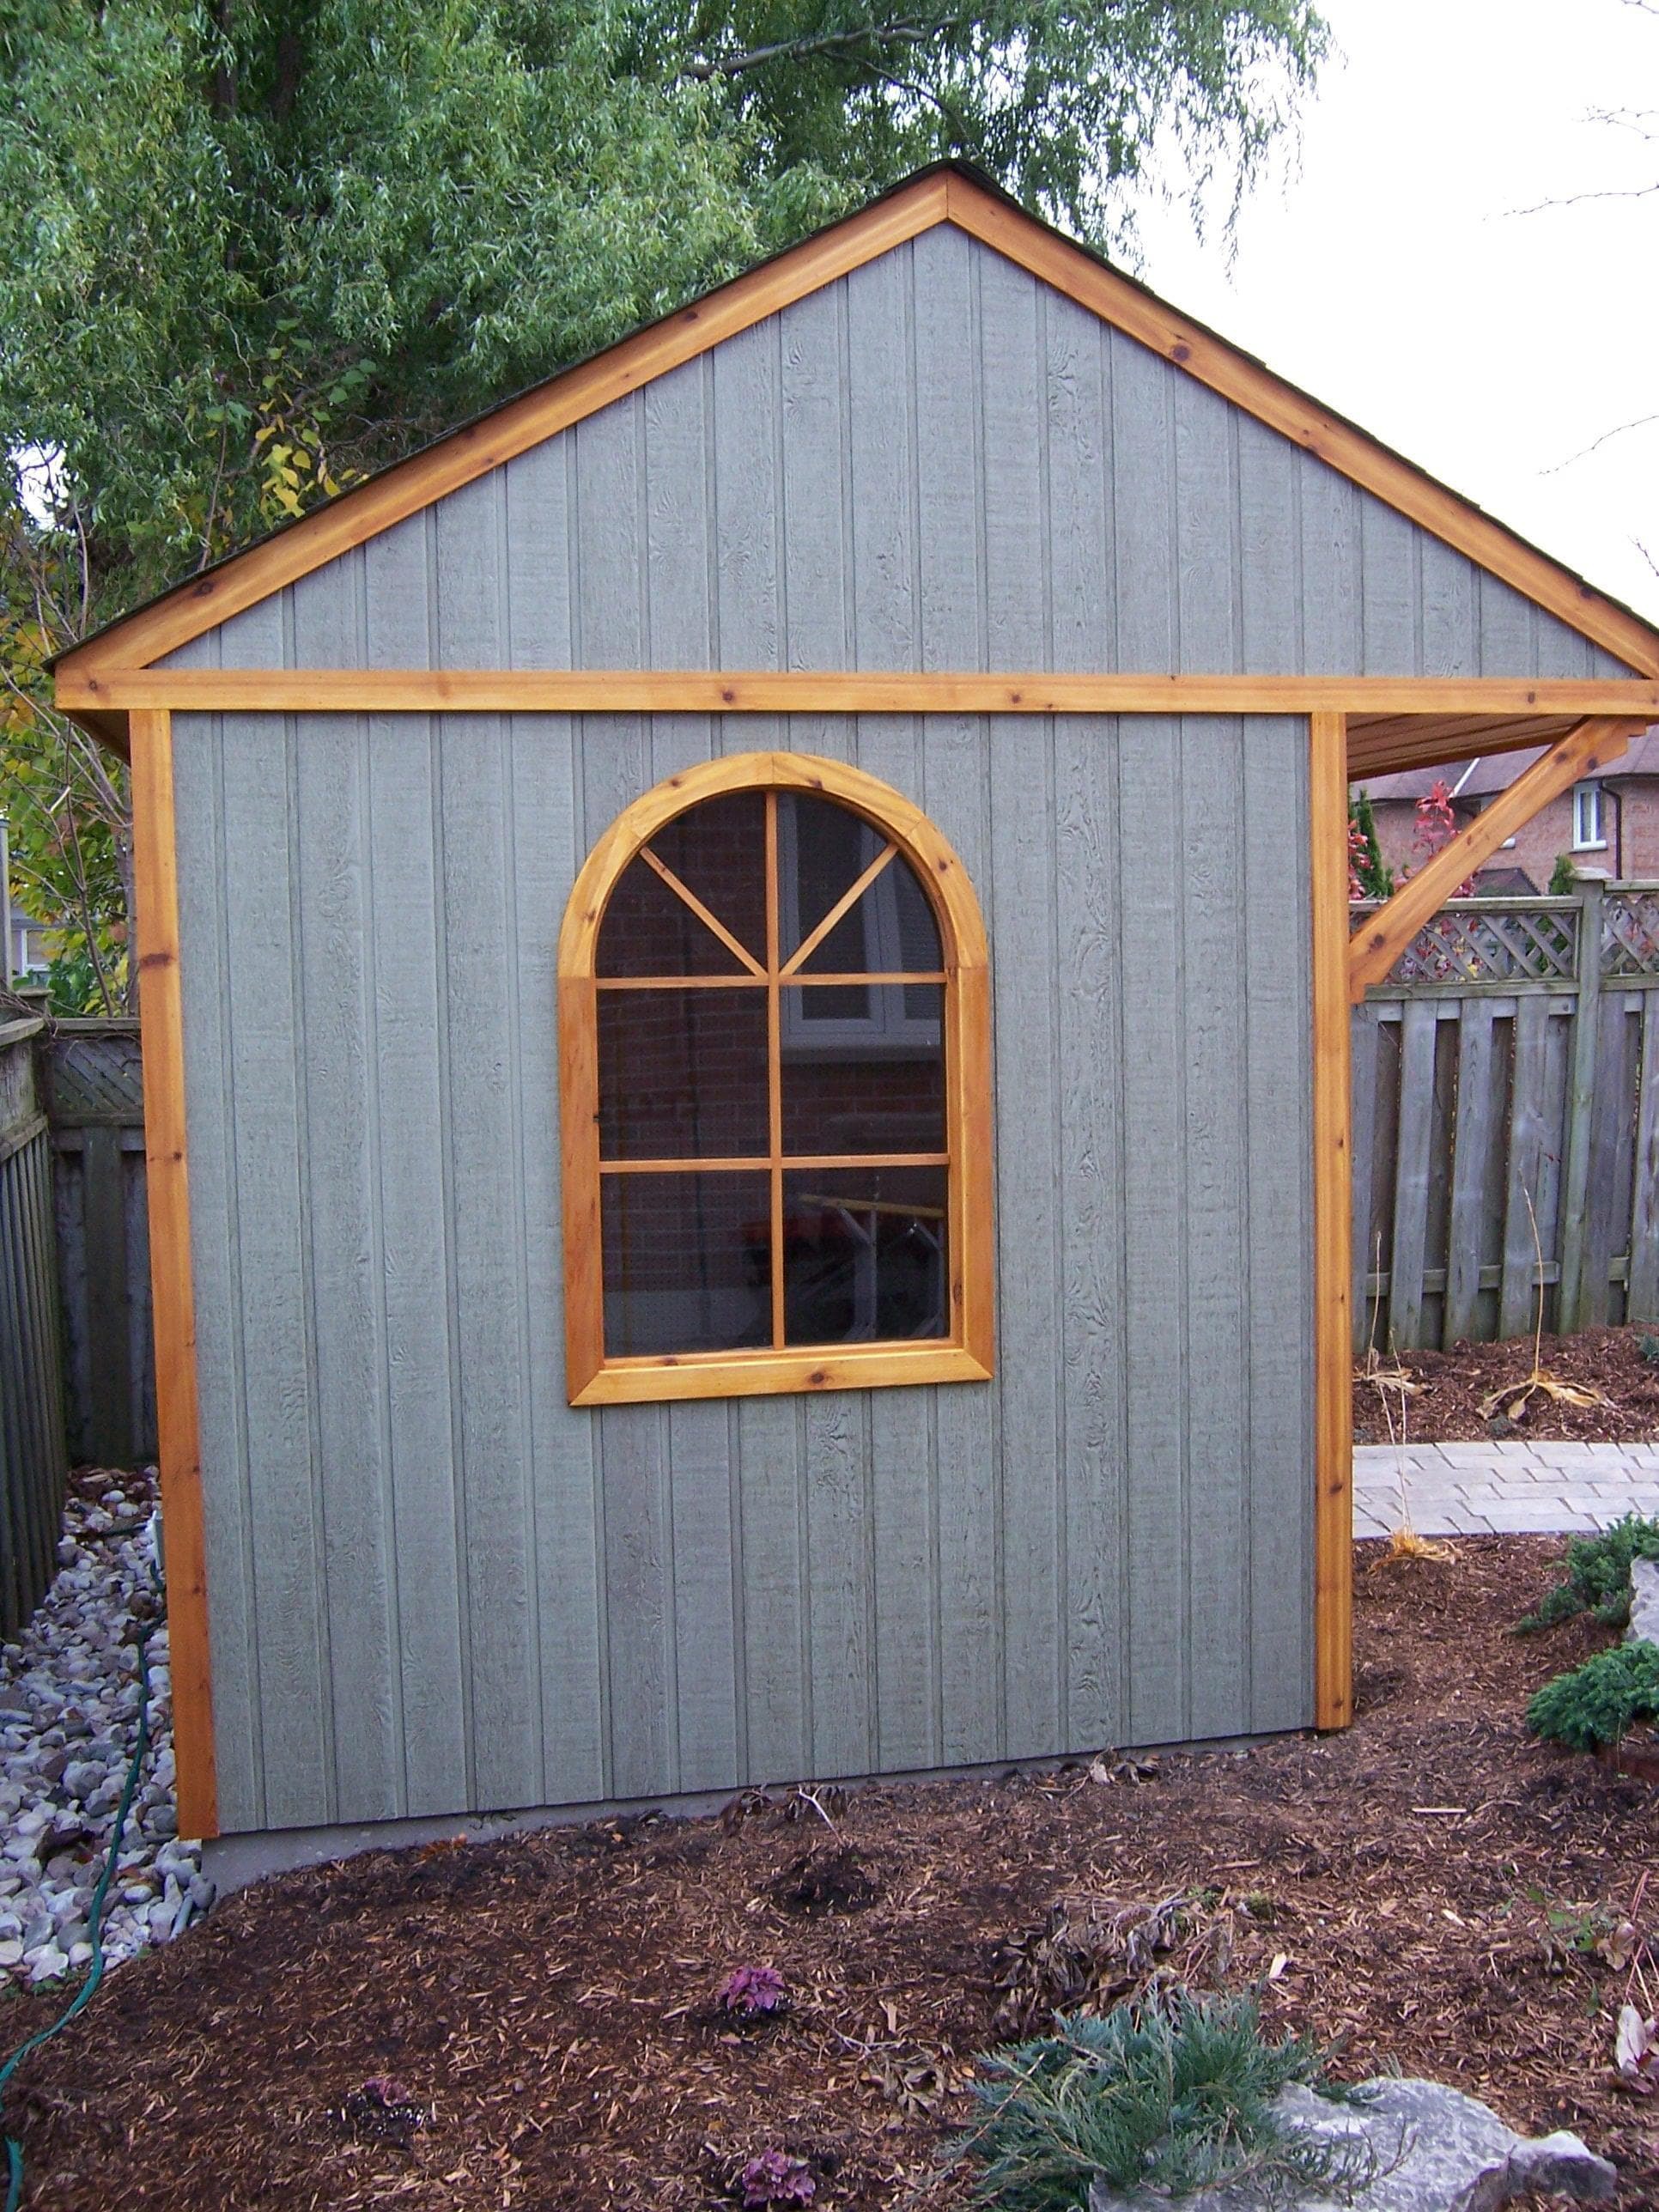 Canexel Glen Echo Garden Shed with bar window in Toronto Ontario. ID number 185988-5